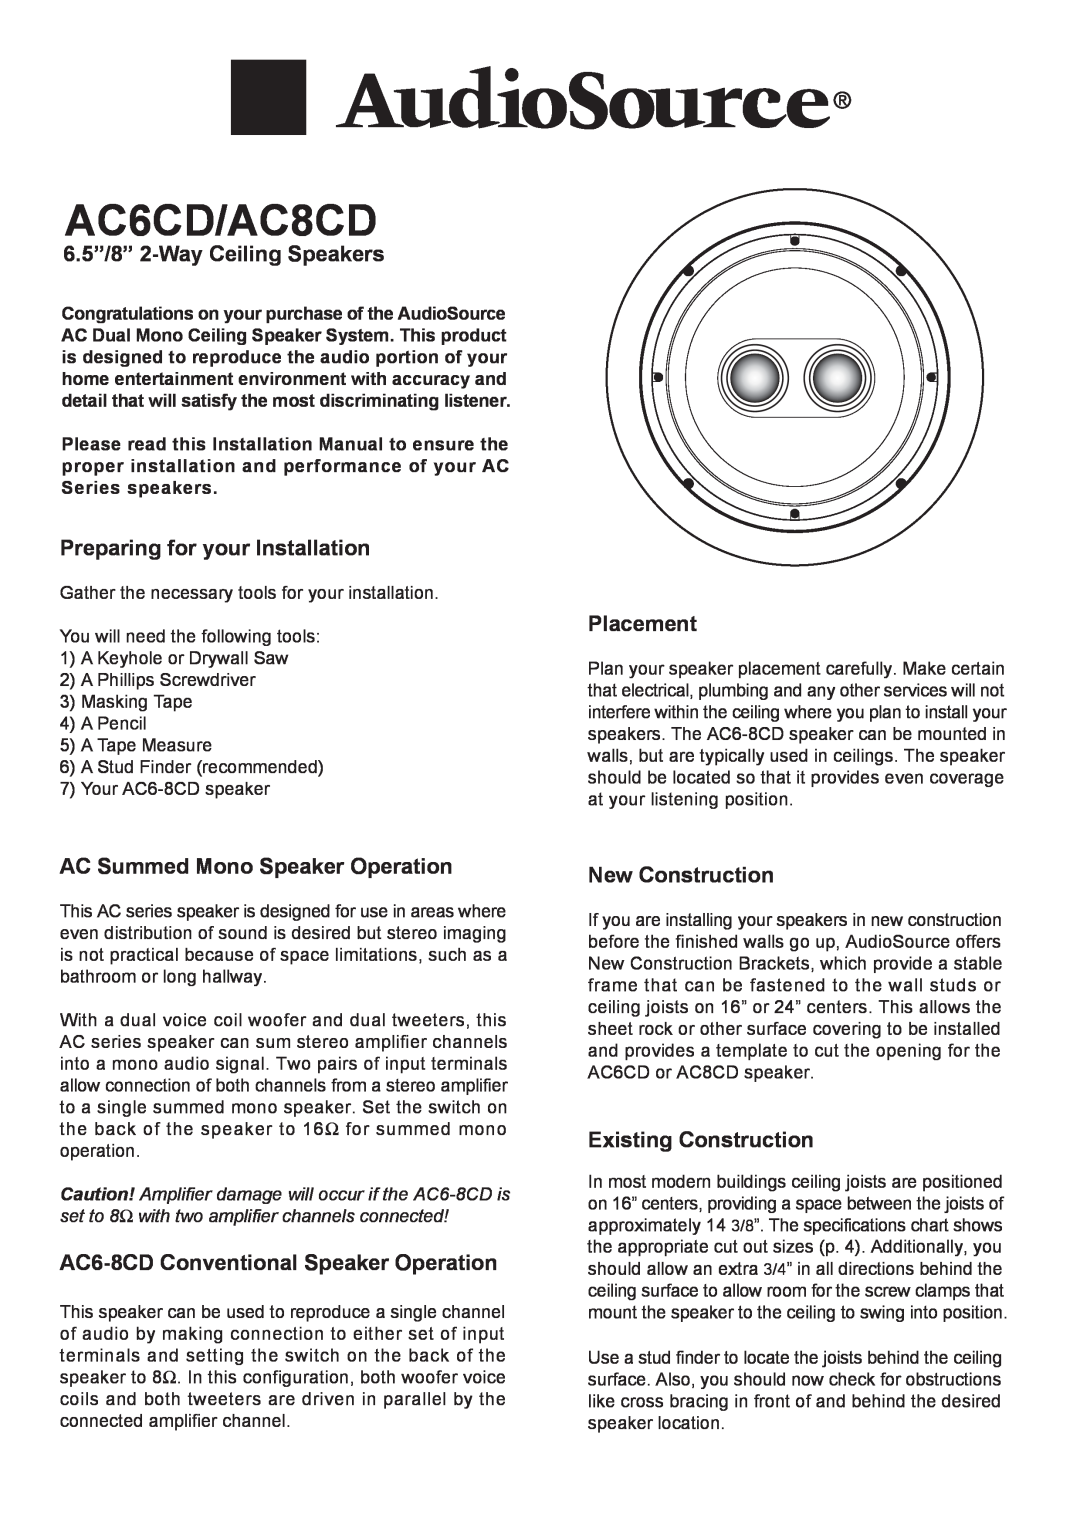 AudioSource AC8CD installation manual 6.5”/8” 2-WayCeiling Speakers, Preparing for your Installation, Placement 